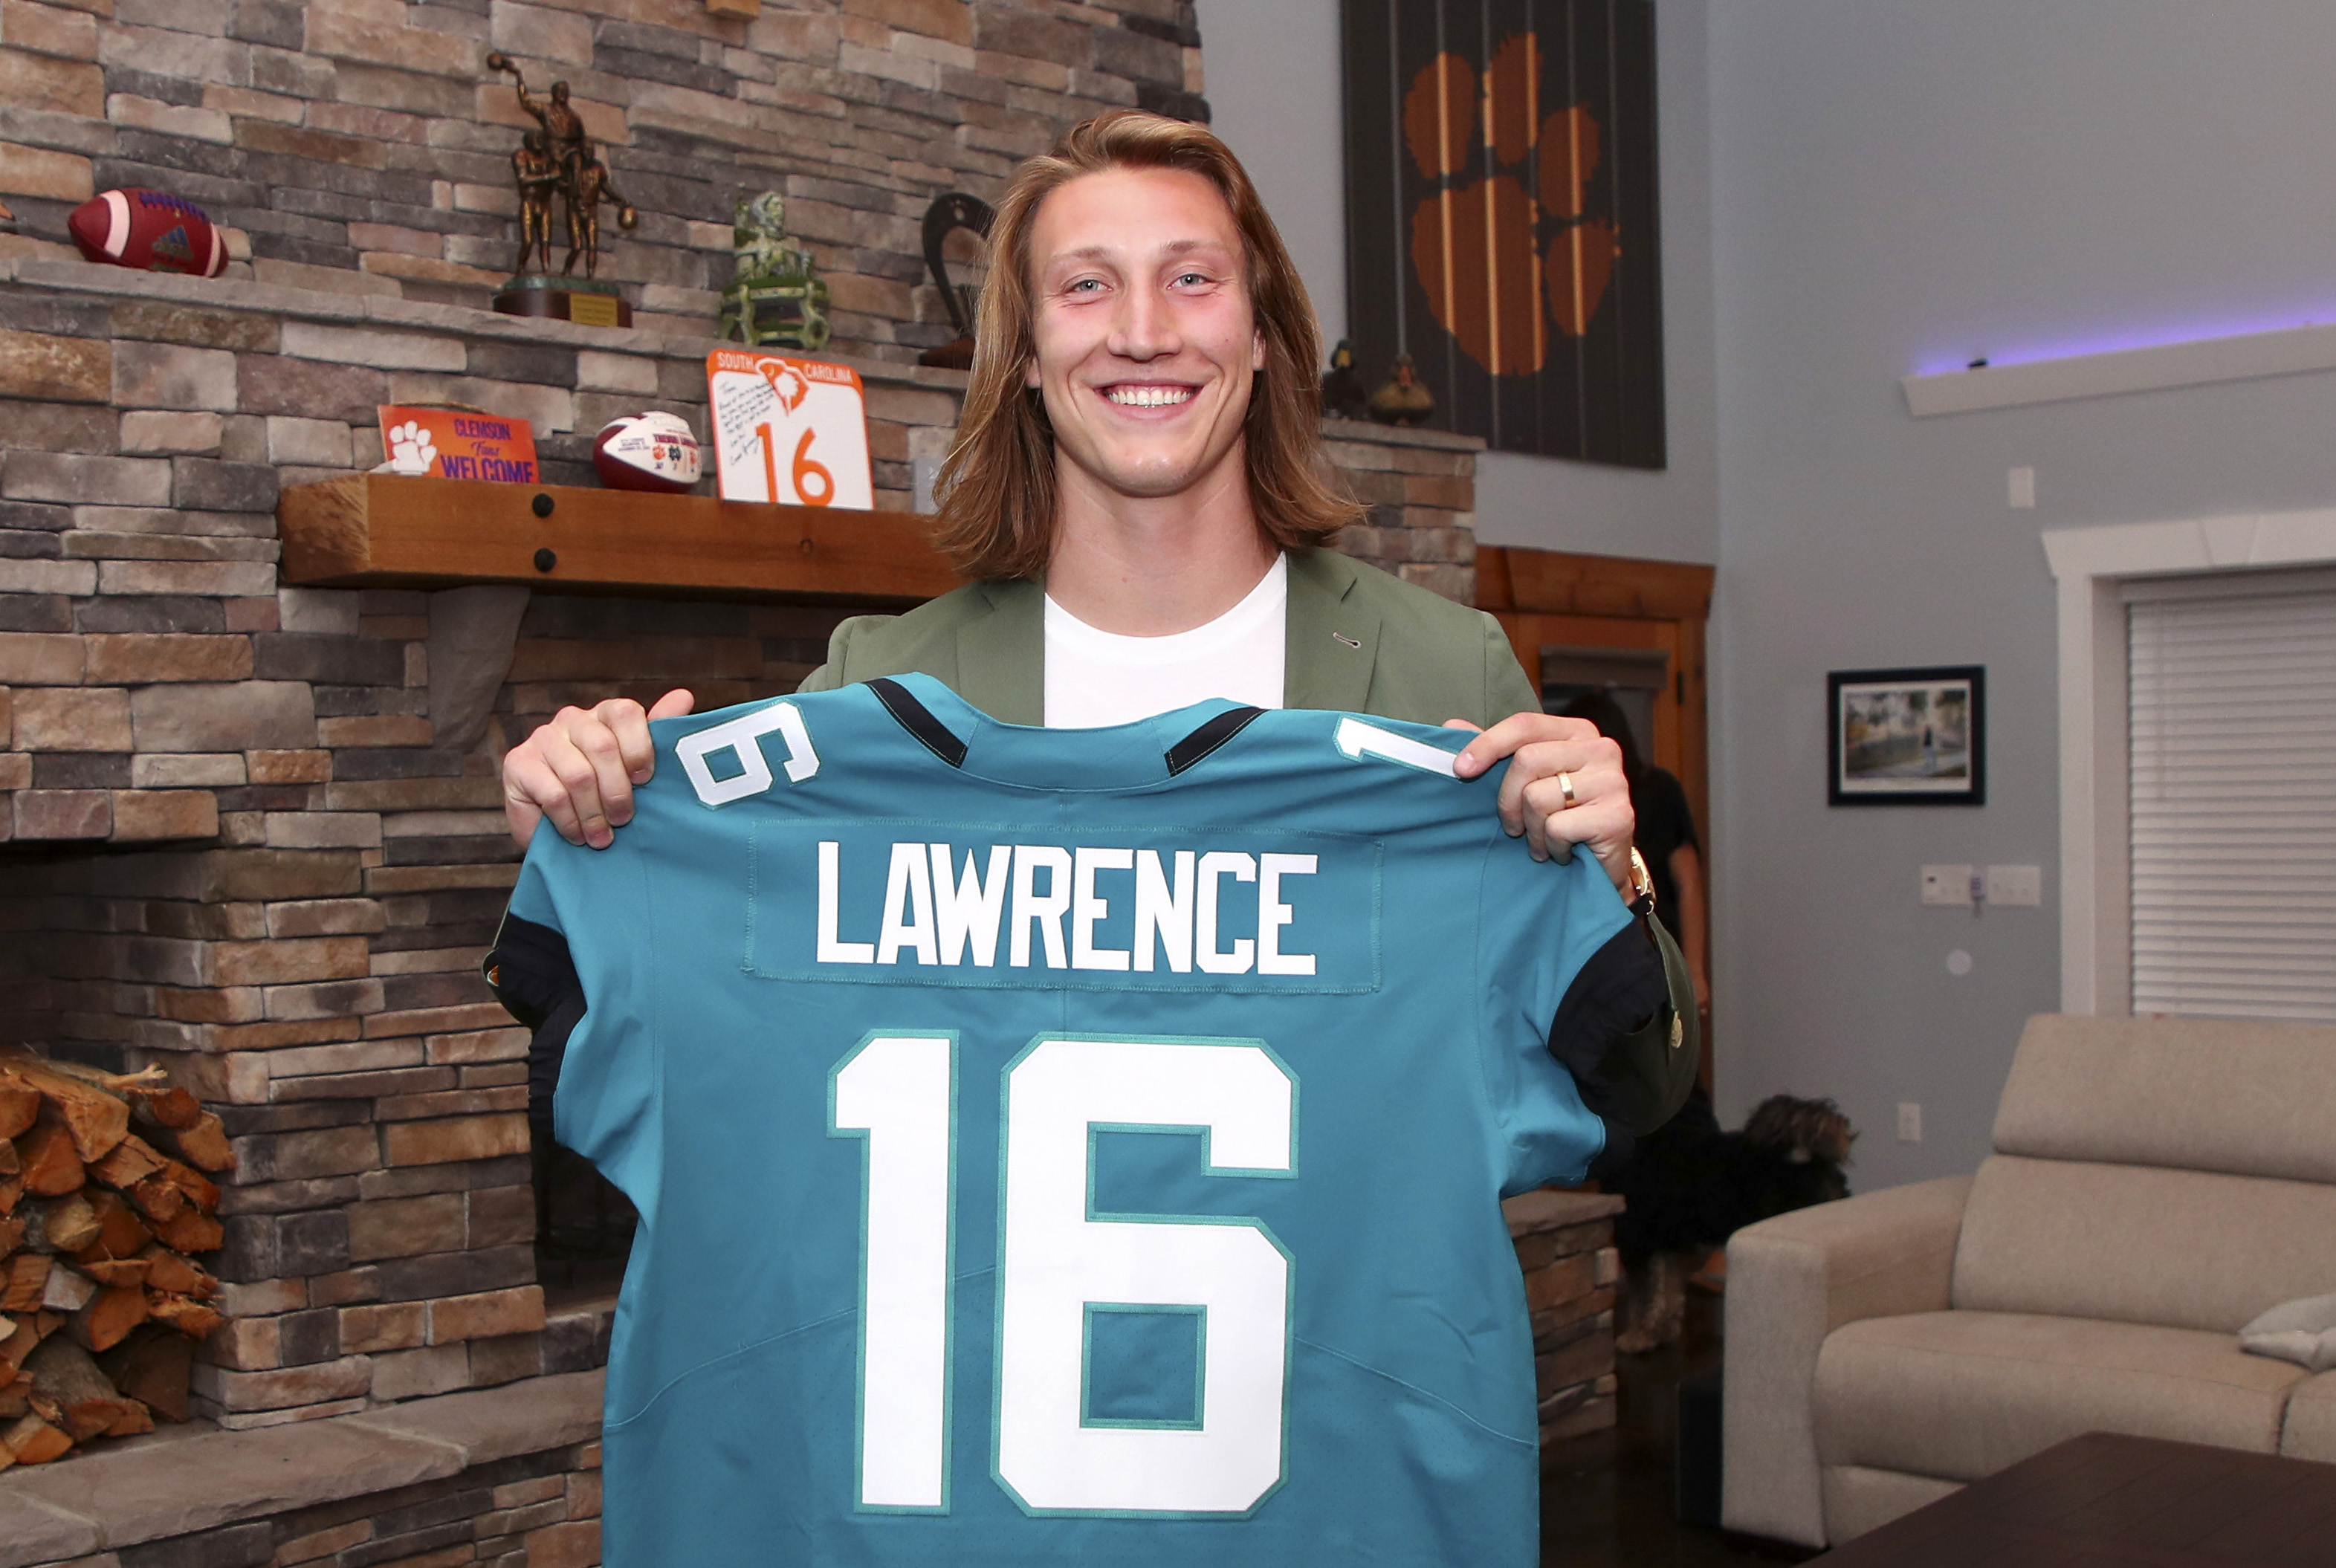 In this handout photo provided by the National Football League, quarterback Trevor Lawrence poses after being selected with the first overall pick by the Jacksonville Jaguars in the 2021 NFL Draft on April 29, 2021 in Seneca, South Carolina.